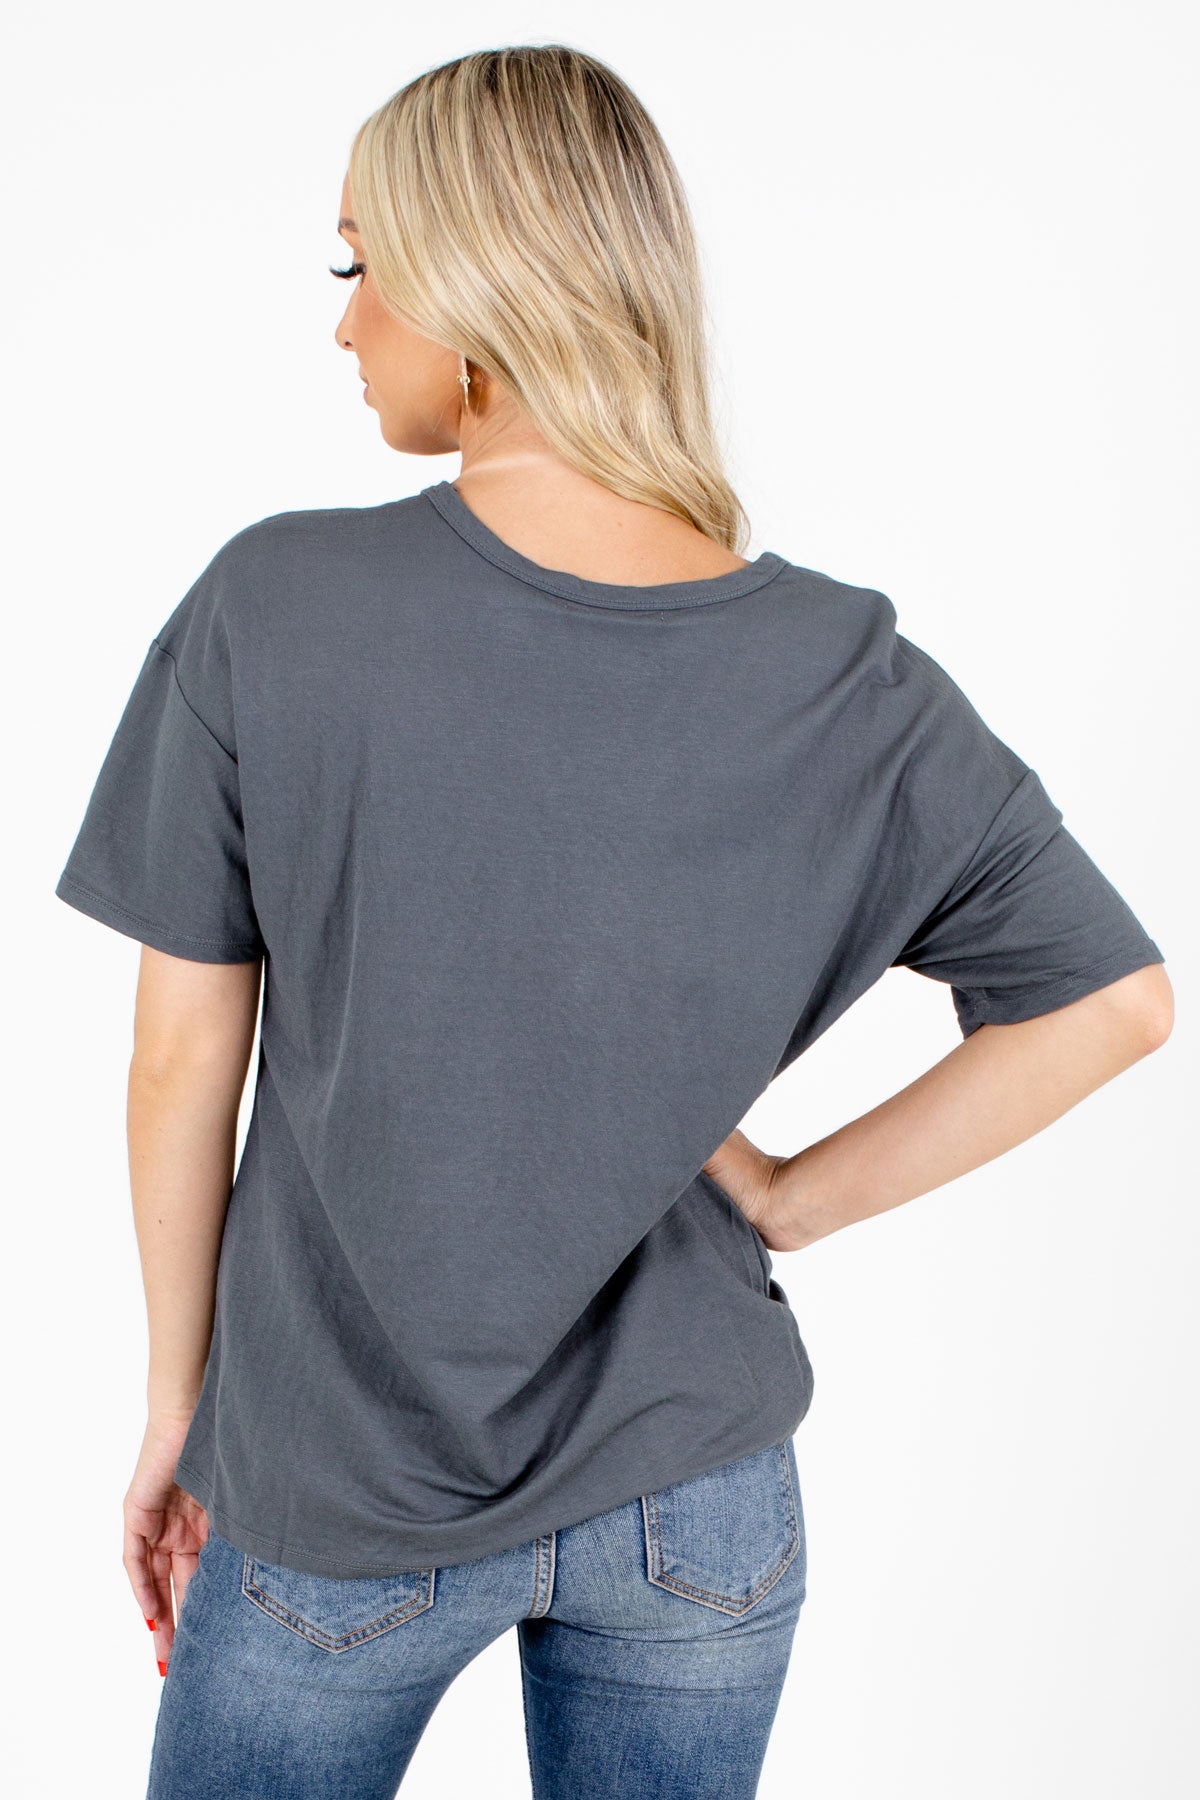 Women's Gray Spring and Summertime Boutique Clothing